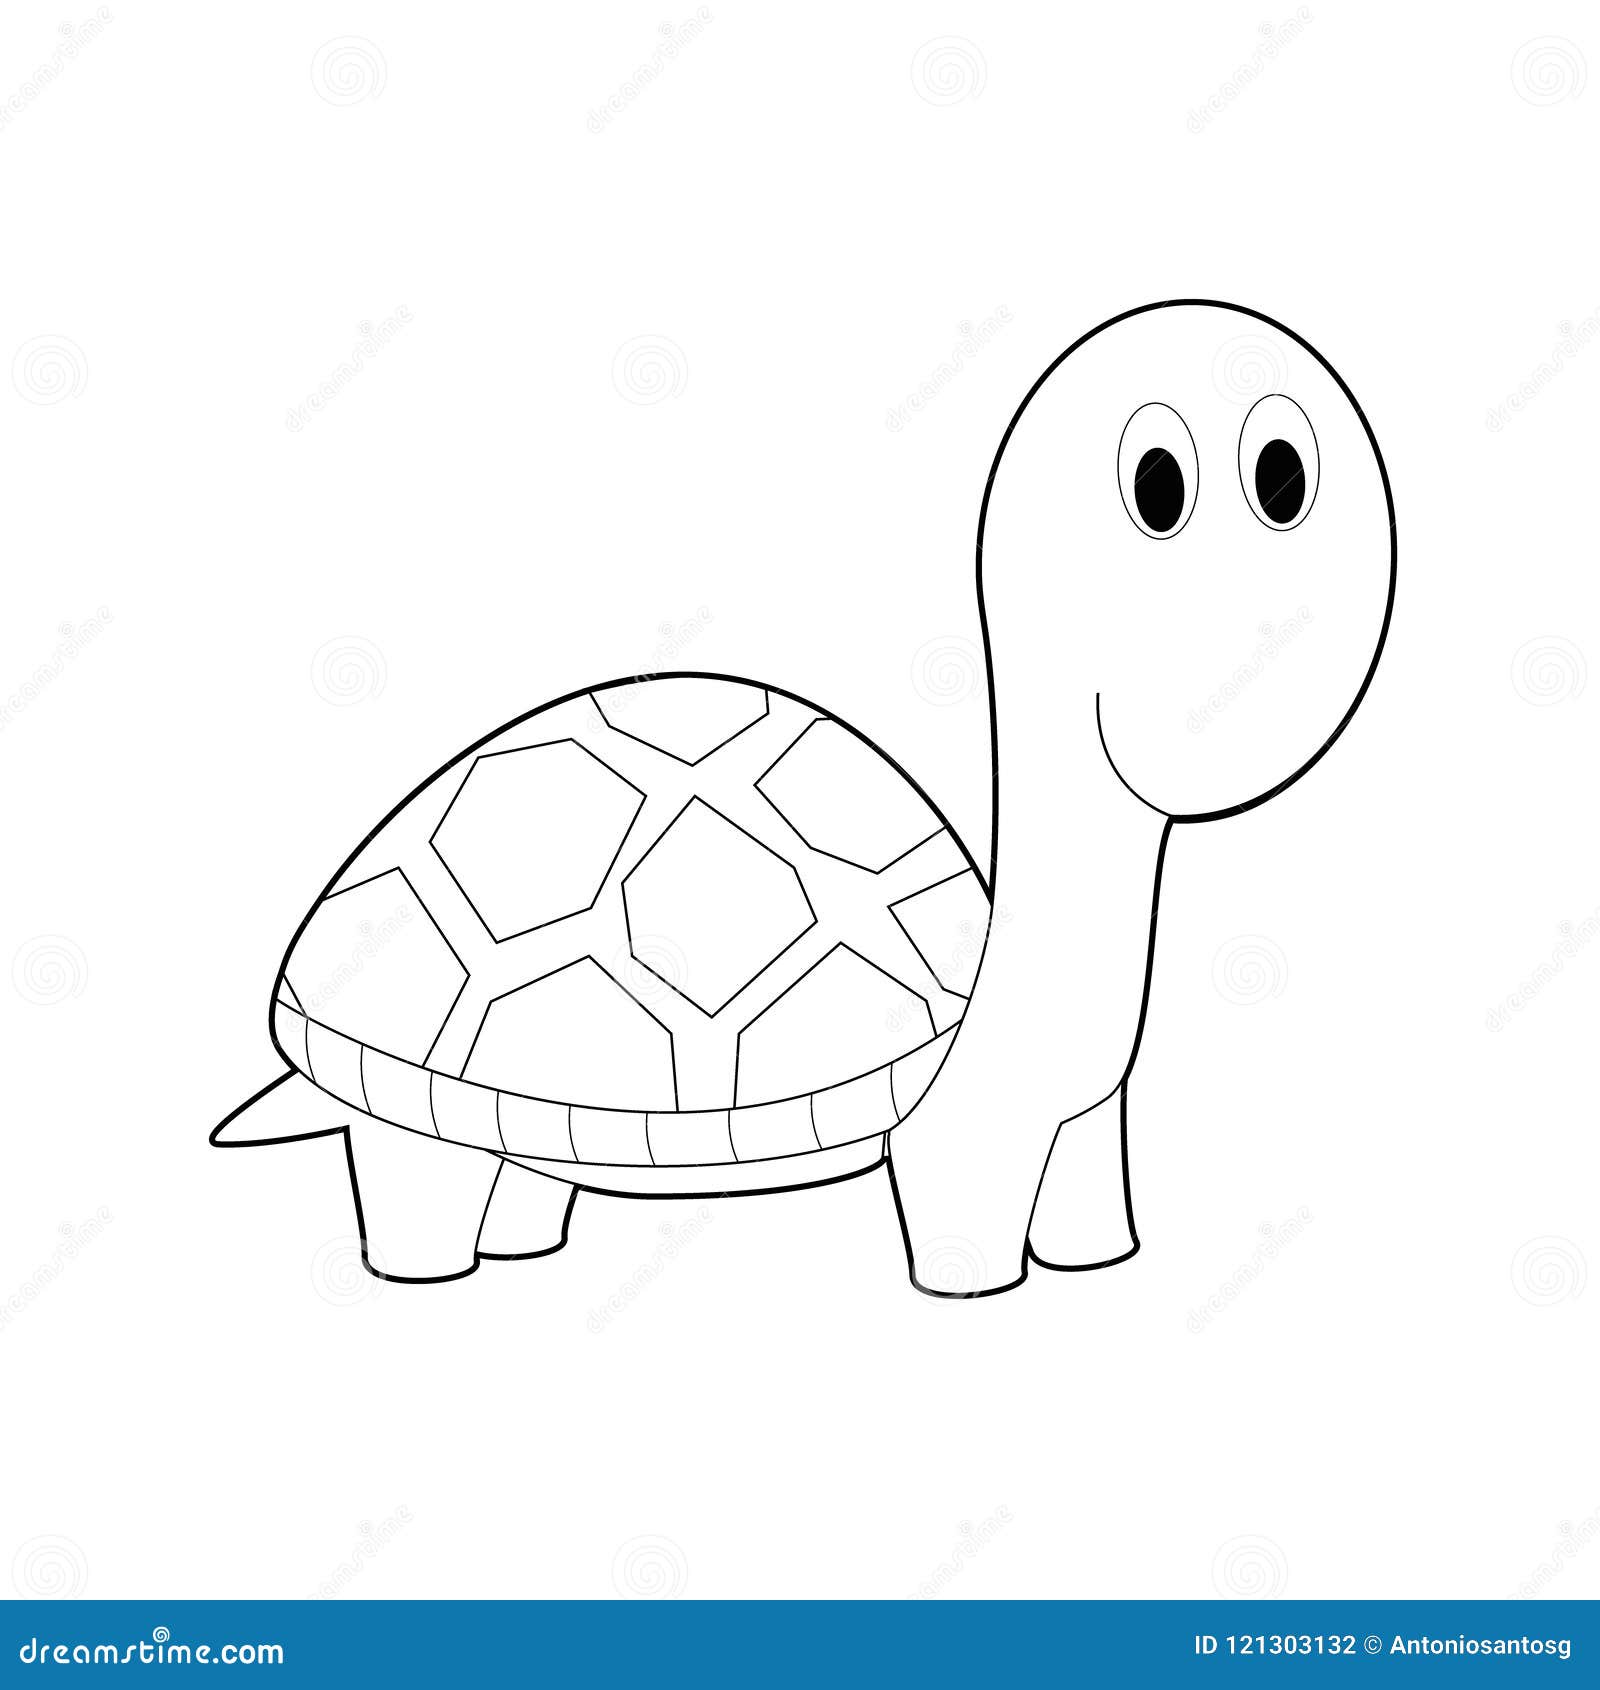 Reptile Drawings Stock Illustrations 244 Reptile Drawings Stock Illustrations Vectors Clipart Dreamstime Click to find the best results for reptile models for your 3d printer. https www dreamstime com easy coloring animals kids turtle drawings little vector illustration image121303132